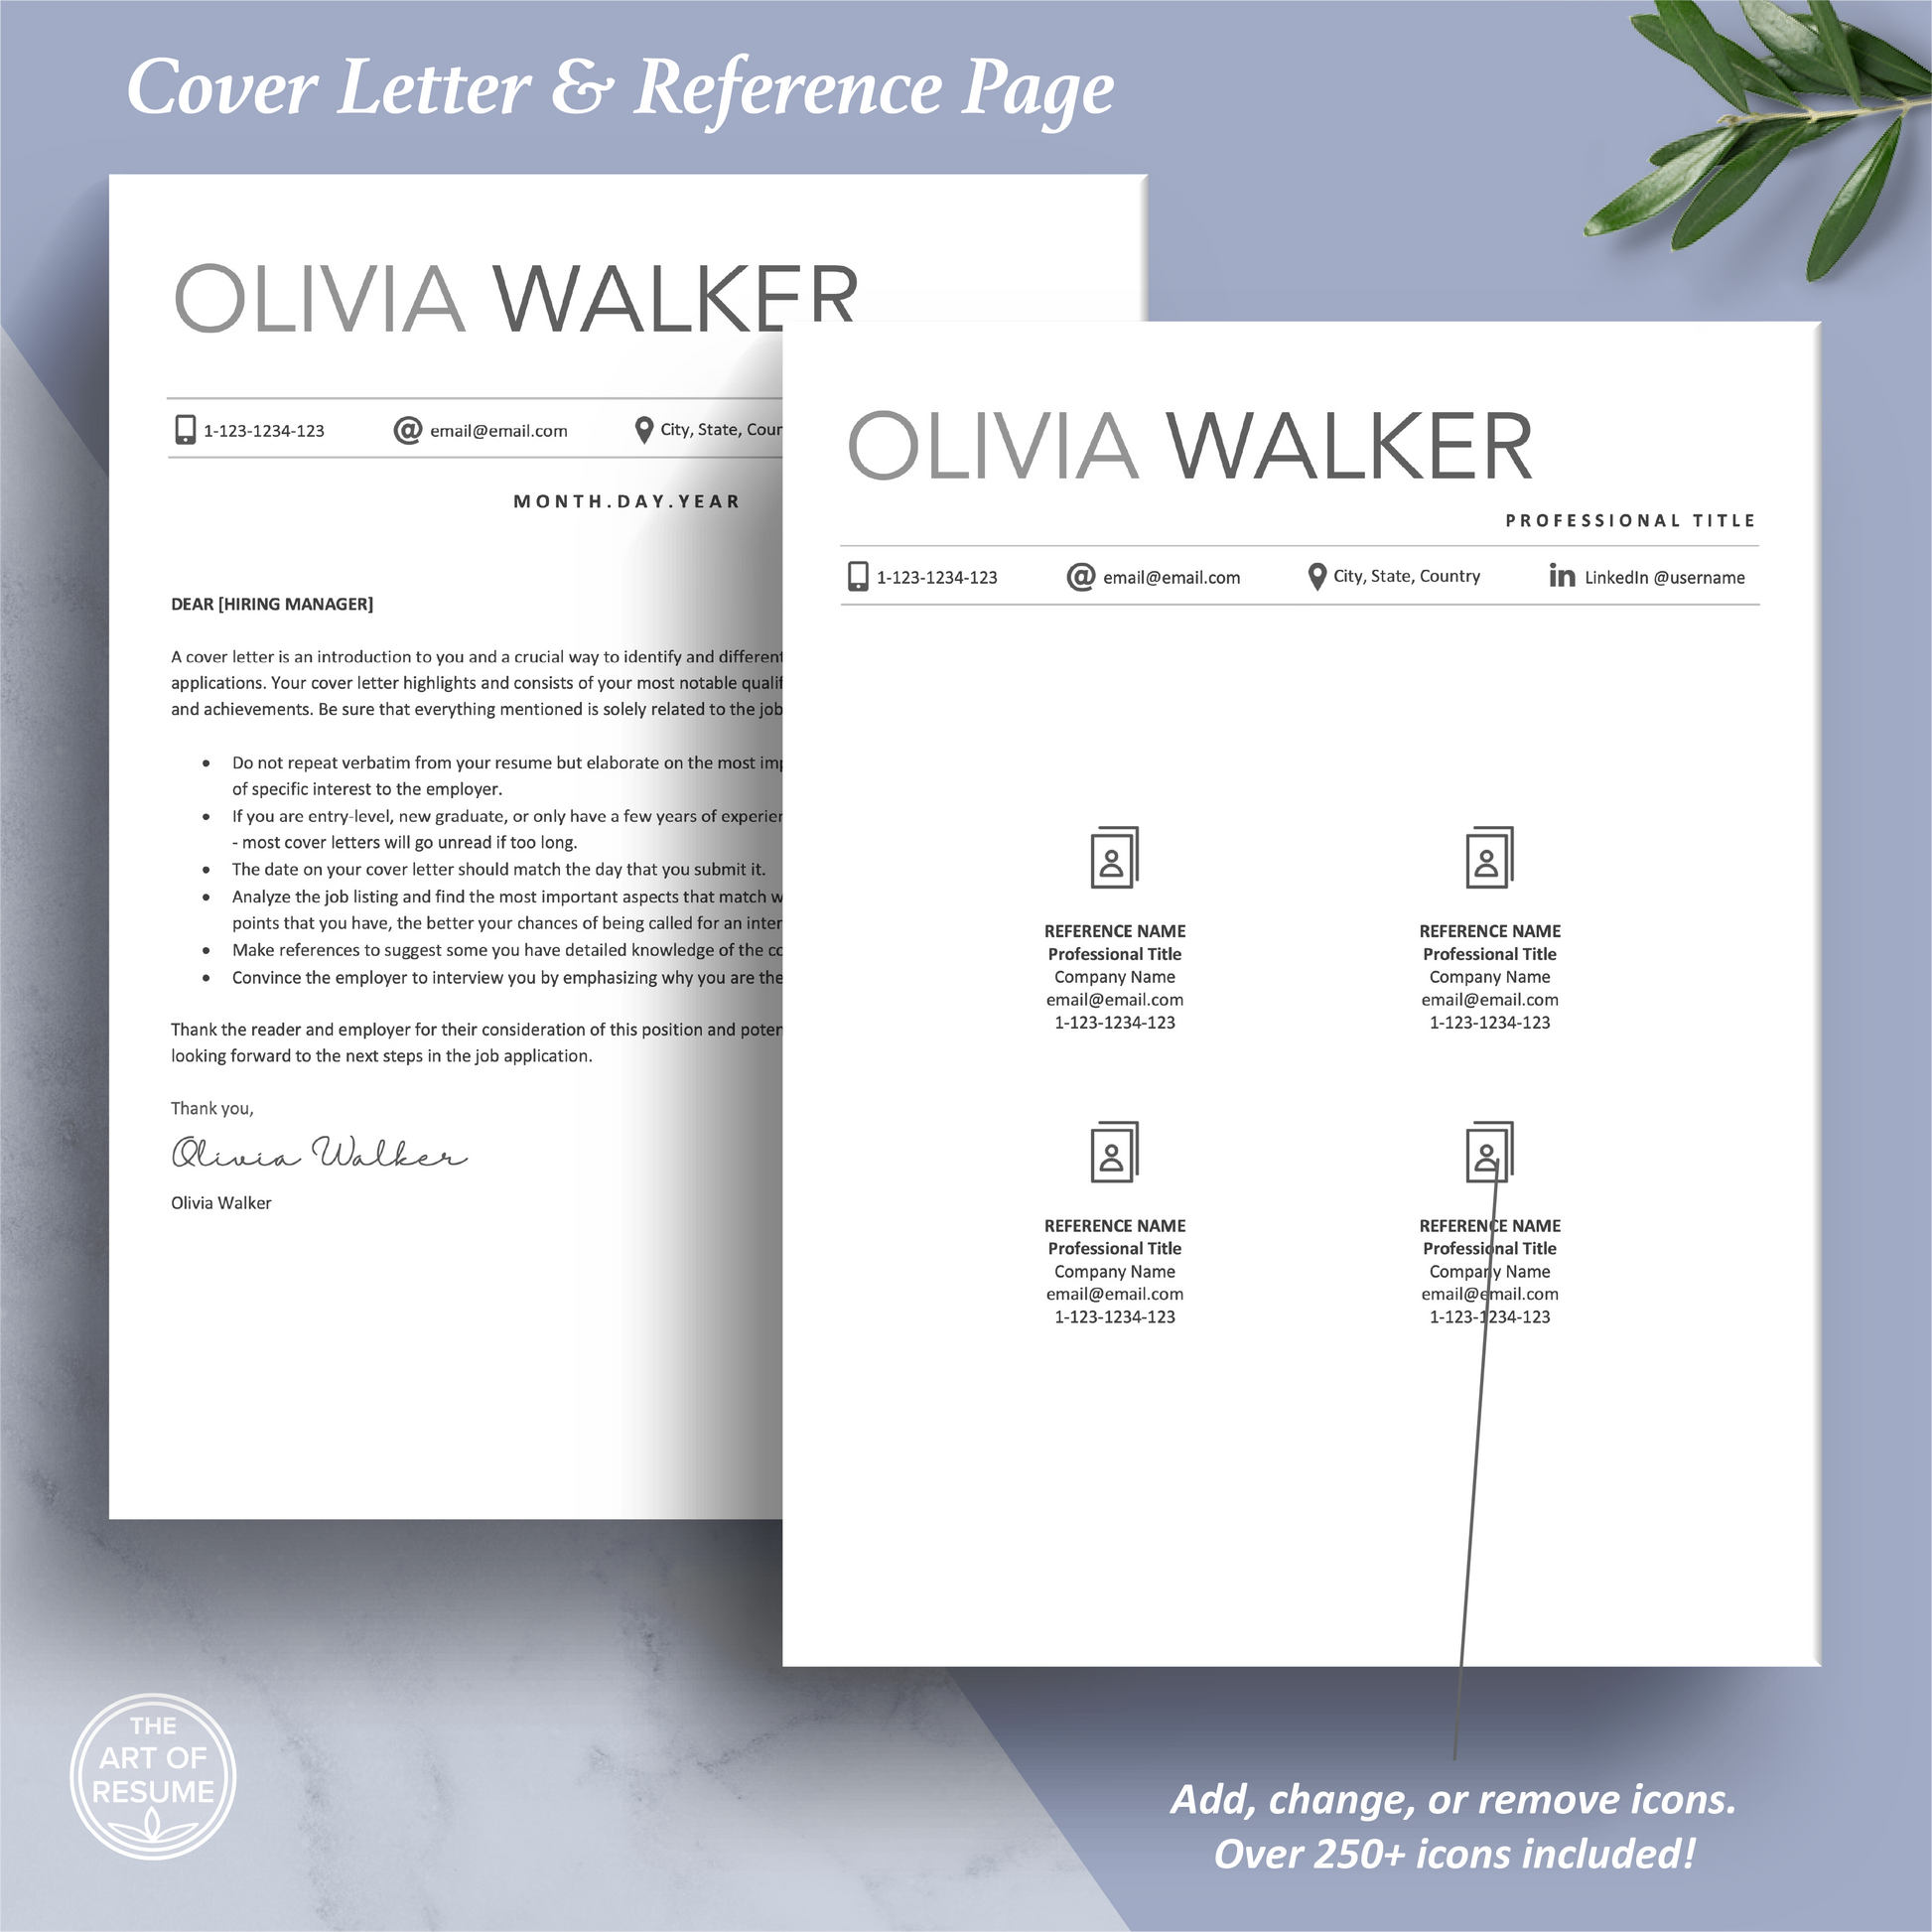 The Art of Resume Templates | Professional Cover Letter and Reference Page Templates Download